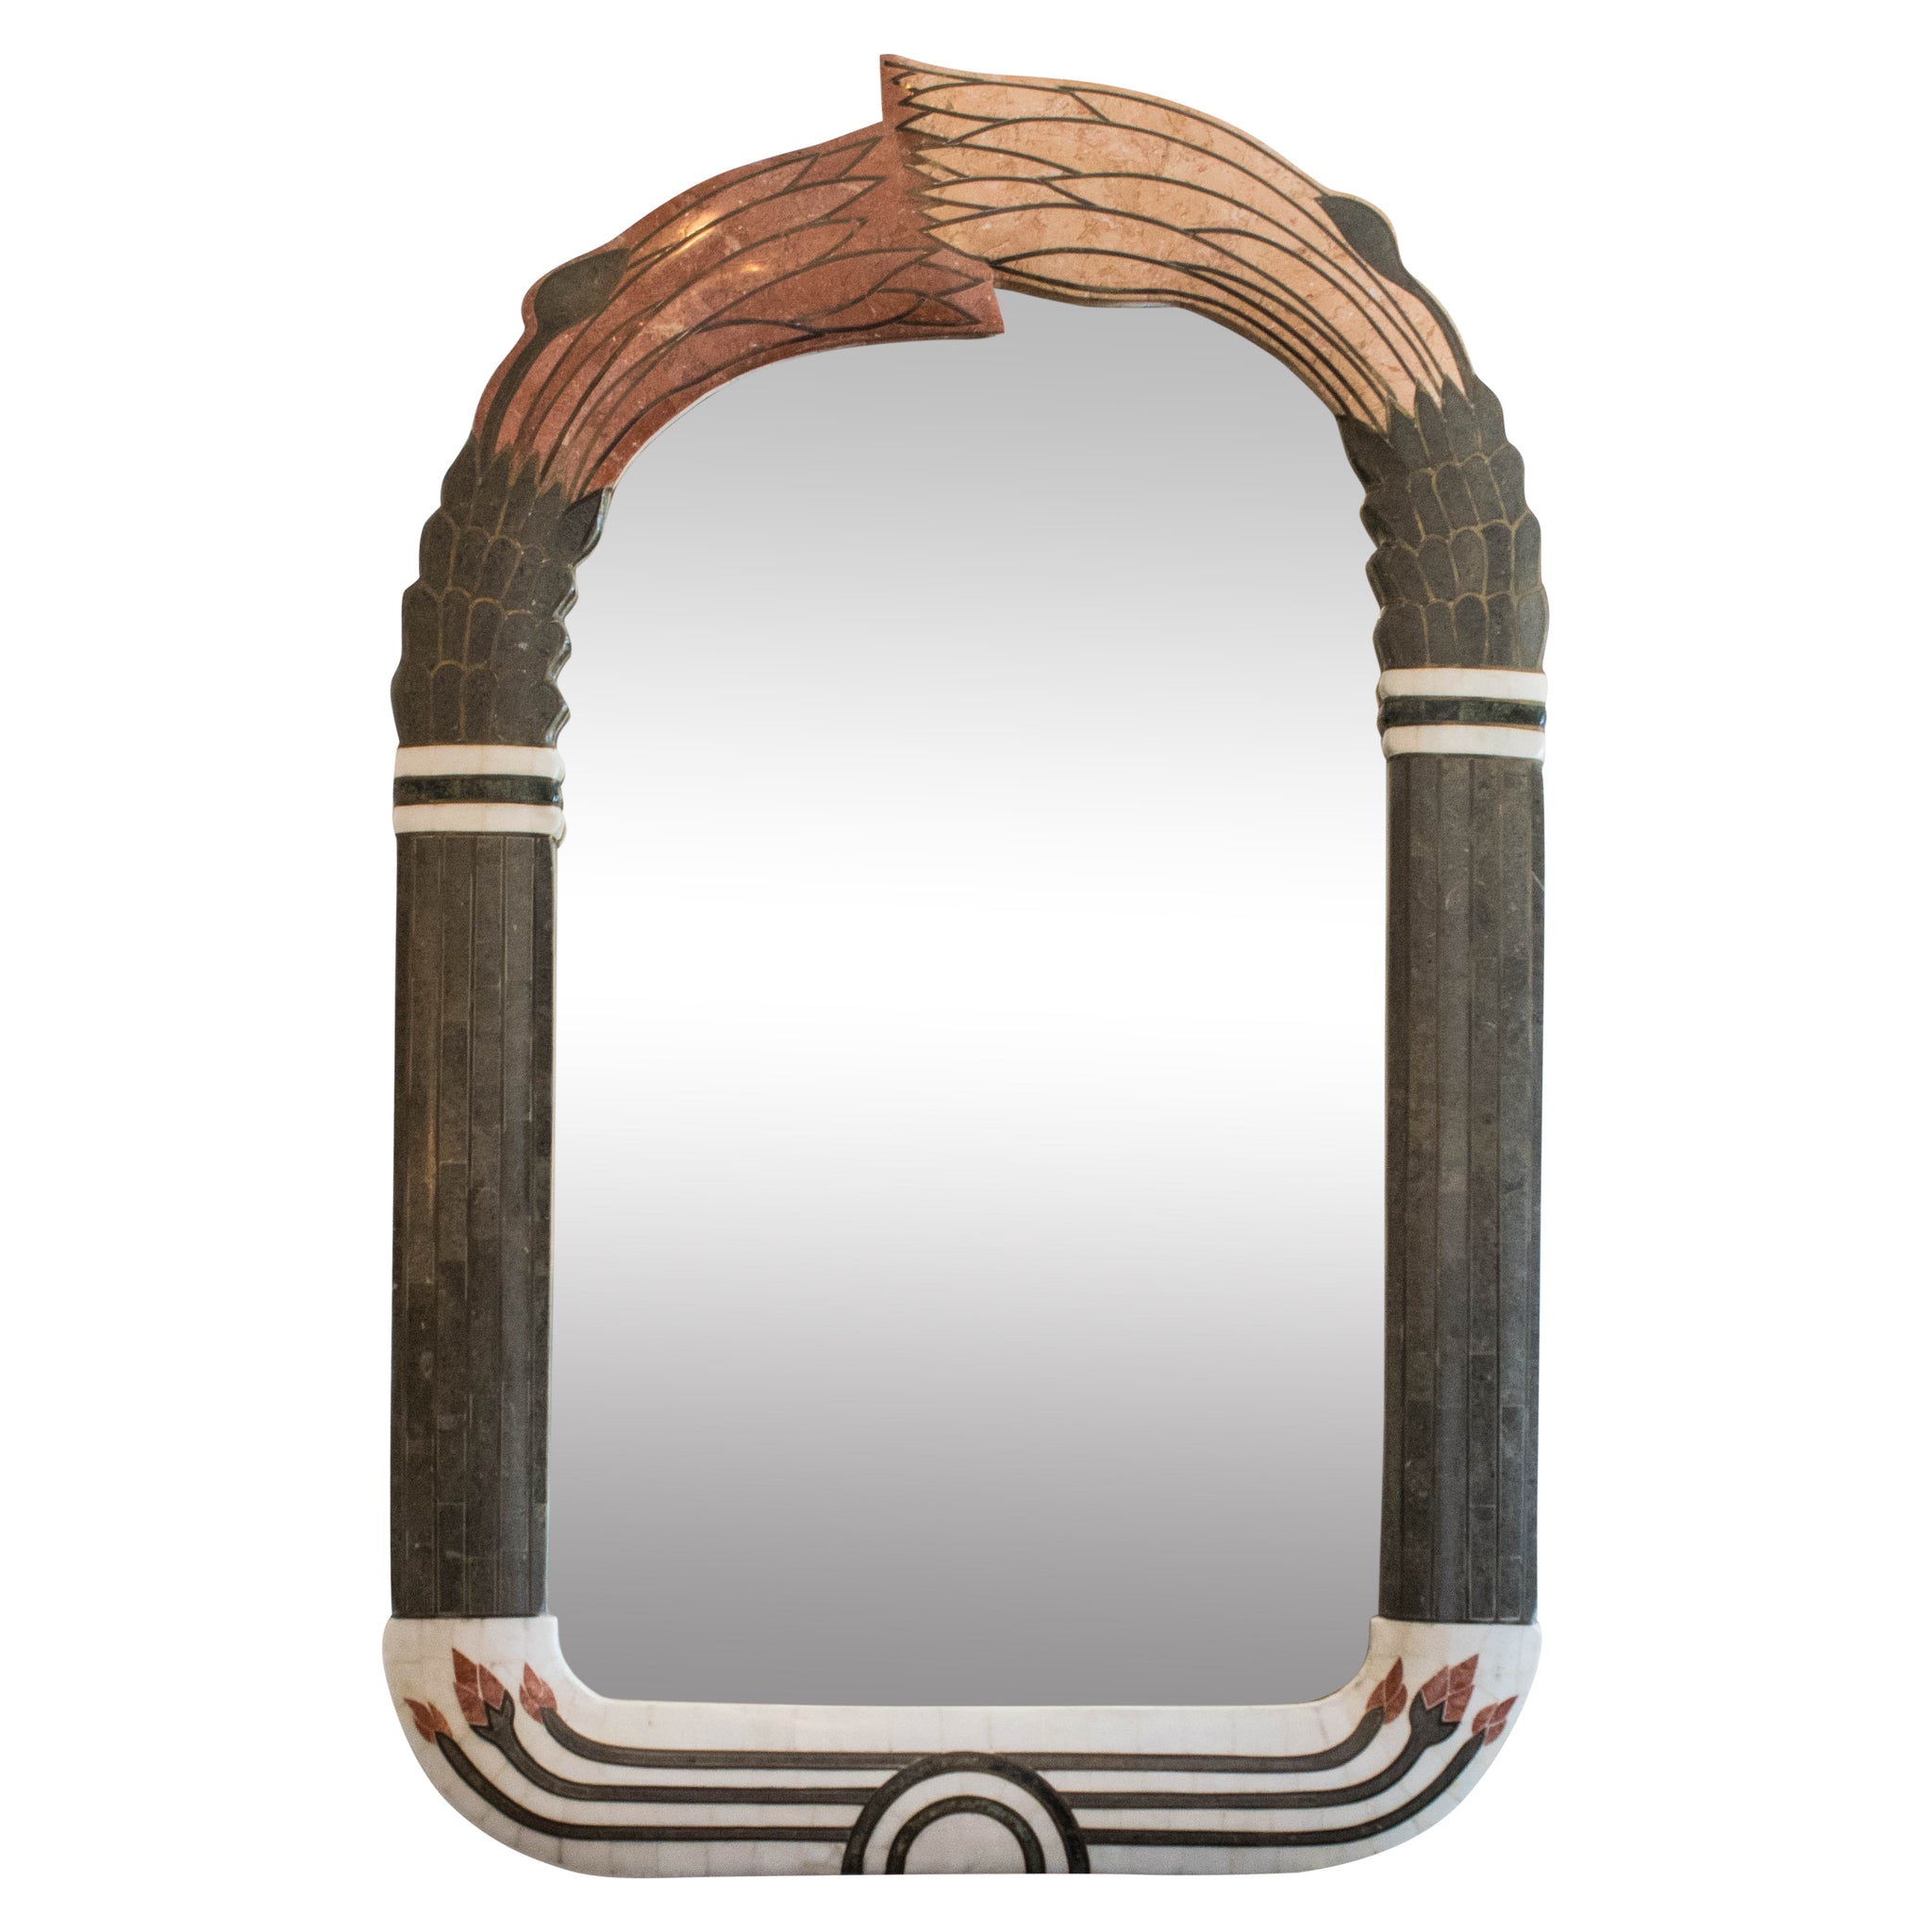 Tessalated Marble And Brass Art Deco Revival Mirror